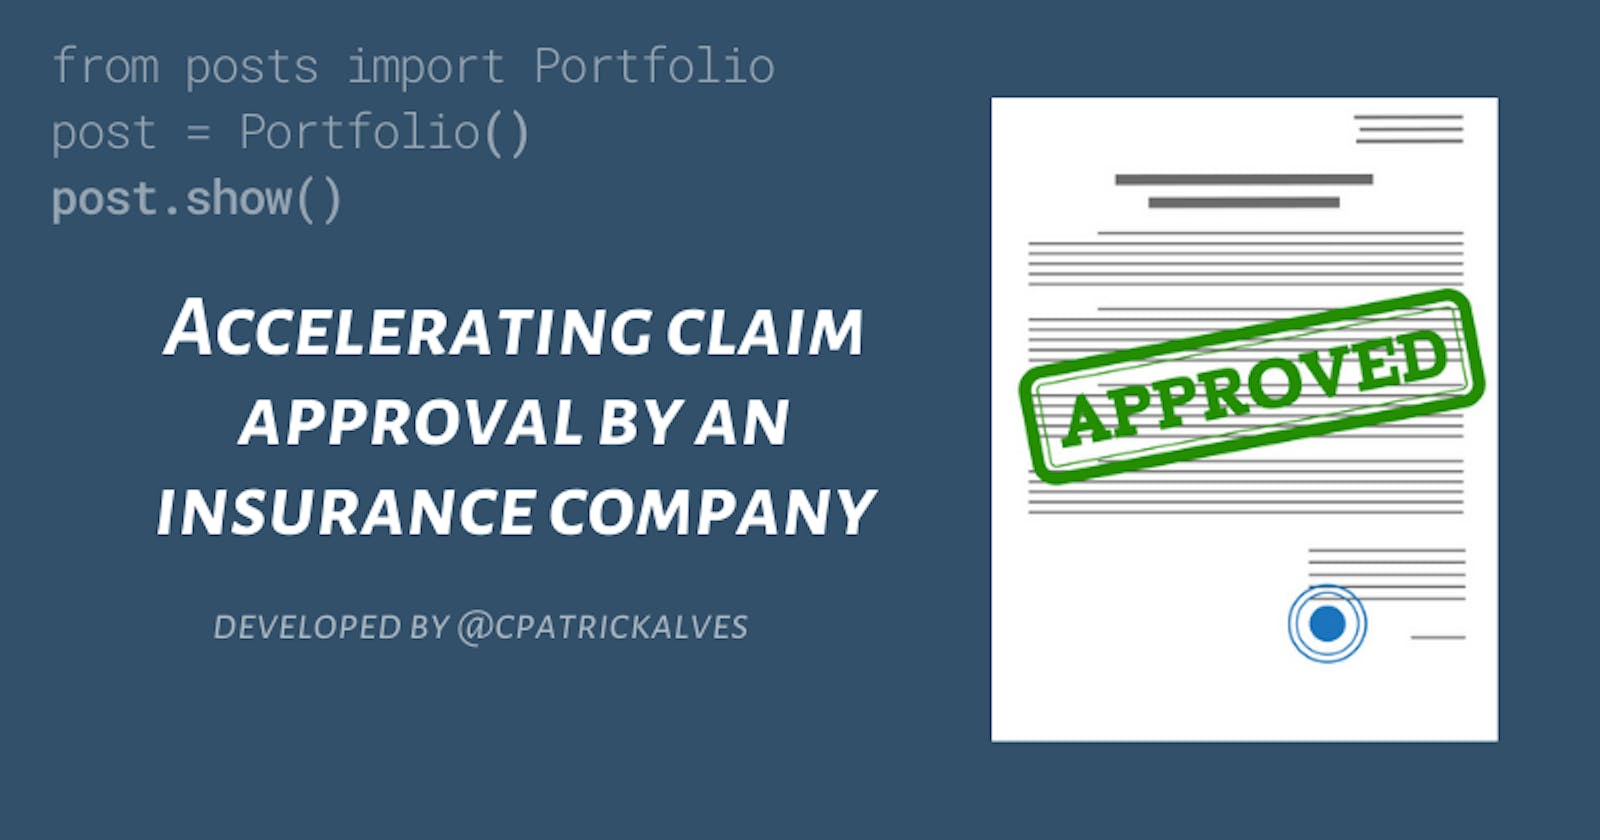 Accelerating claim approval by an insurance company